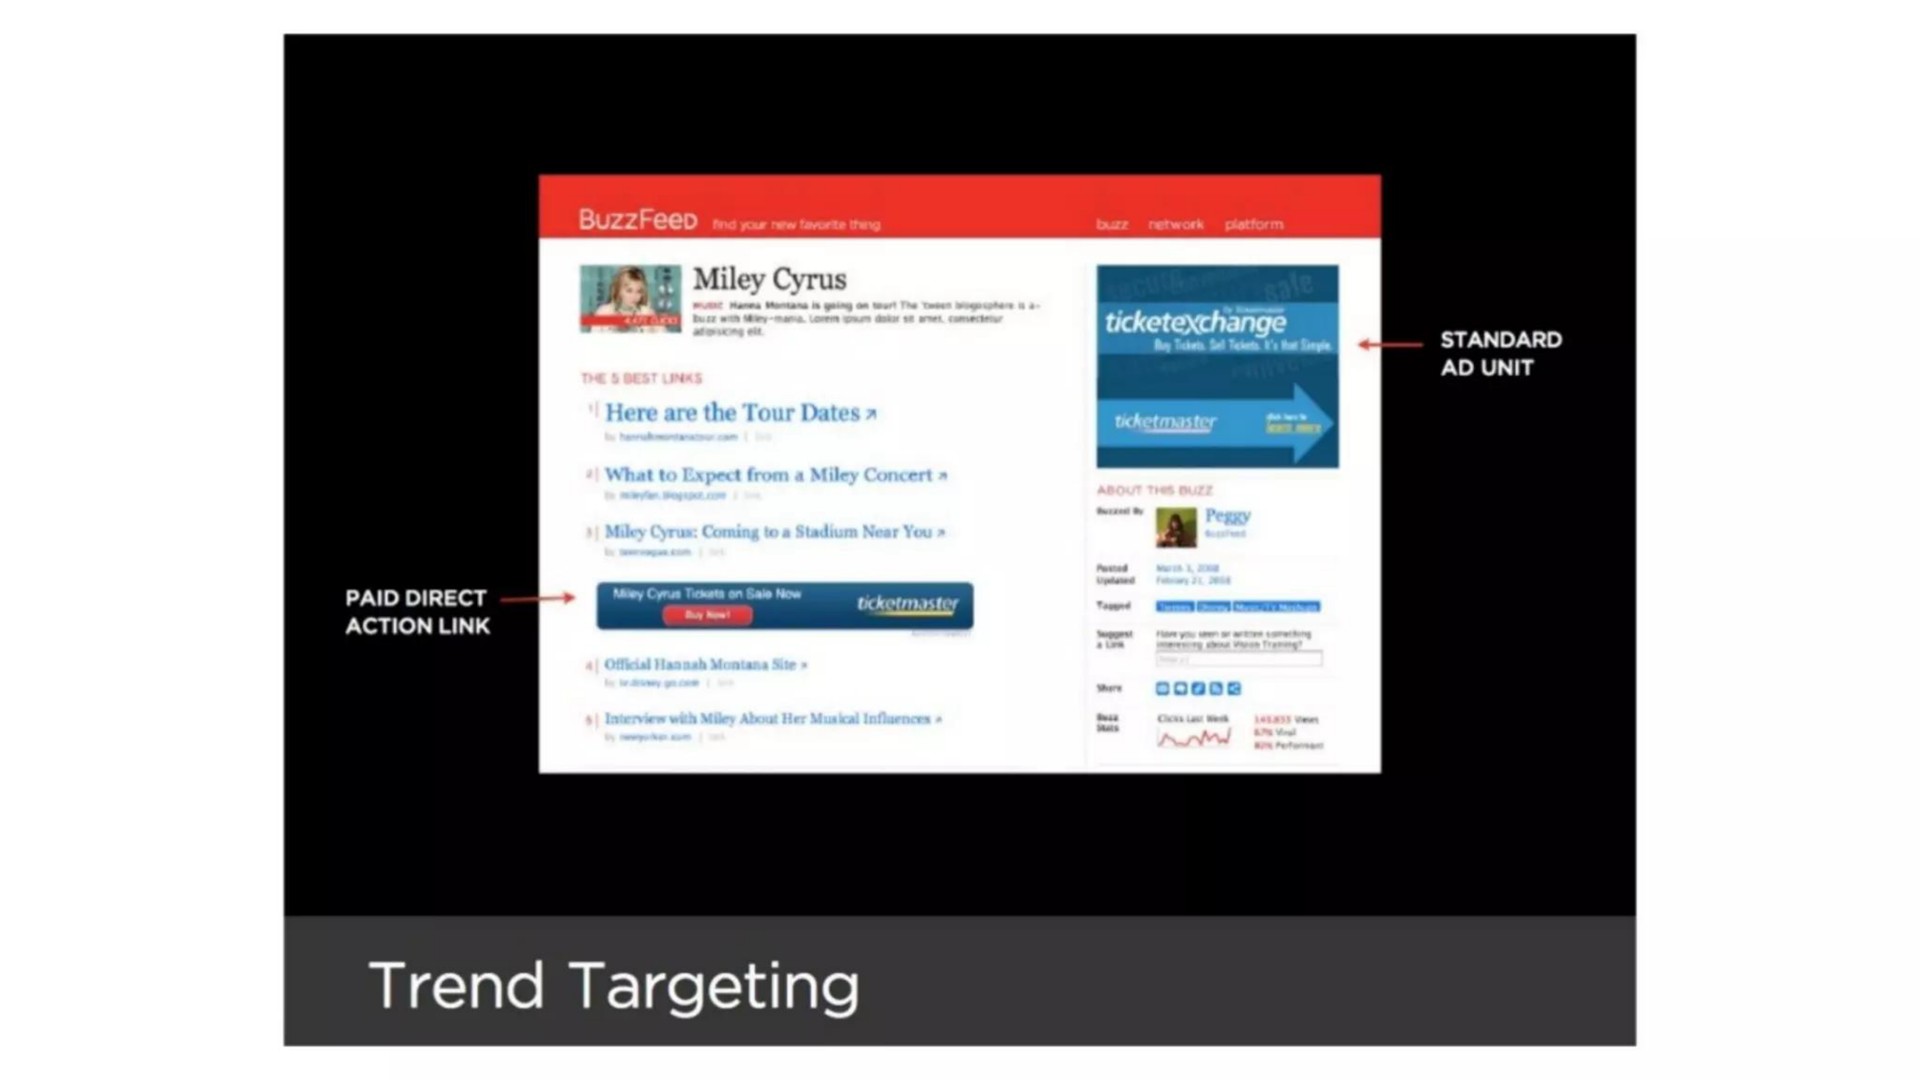 action link i trend targeting | BuzzFeed